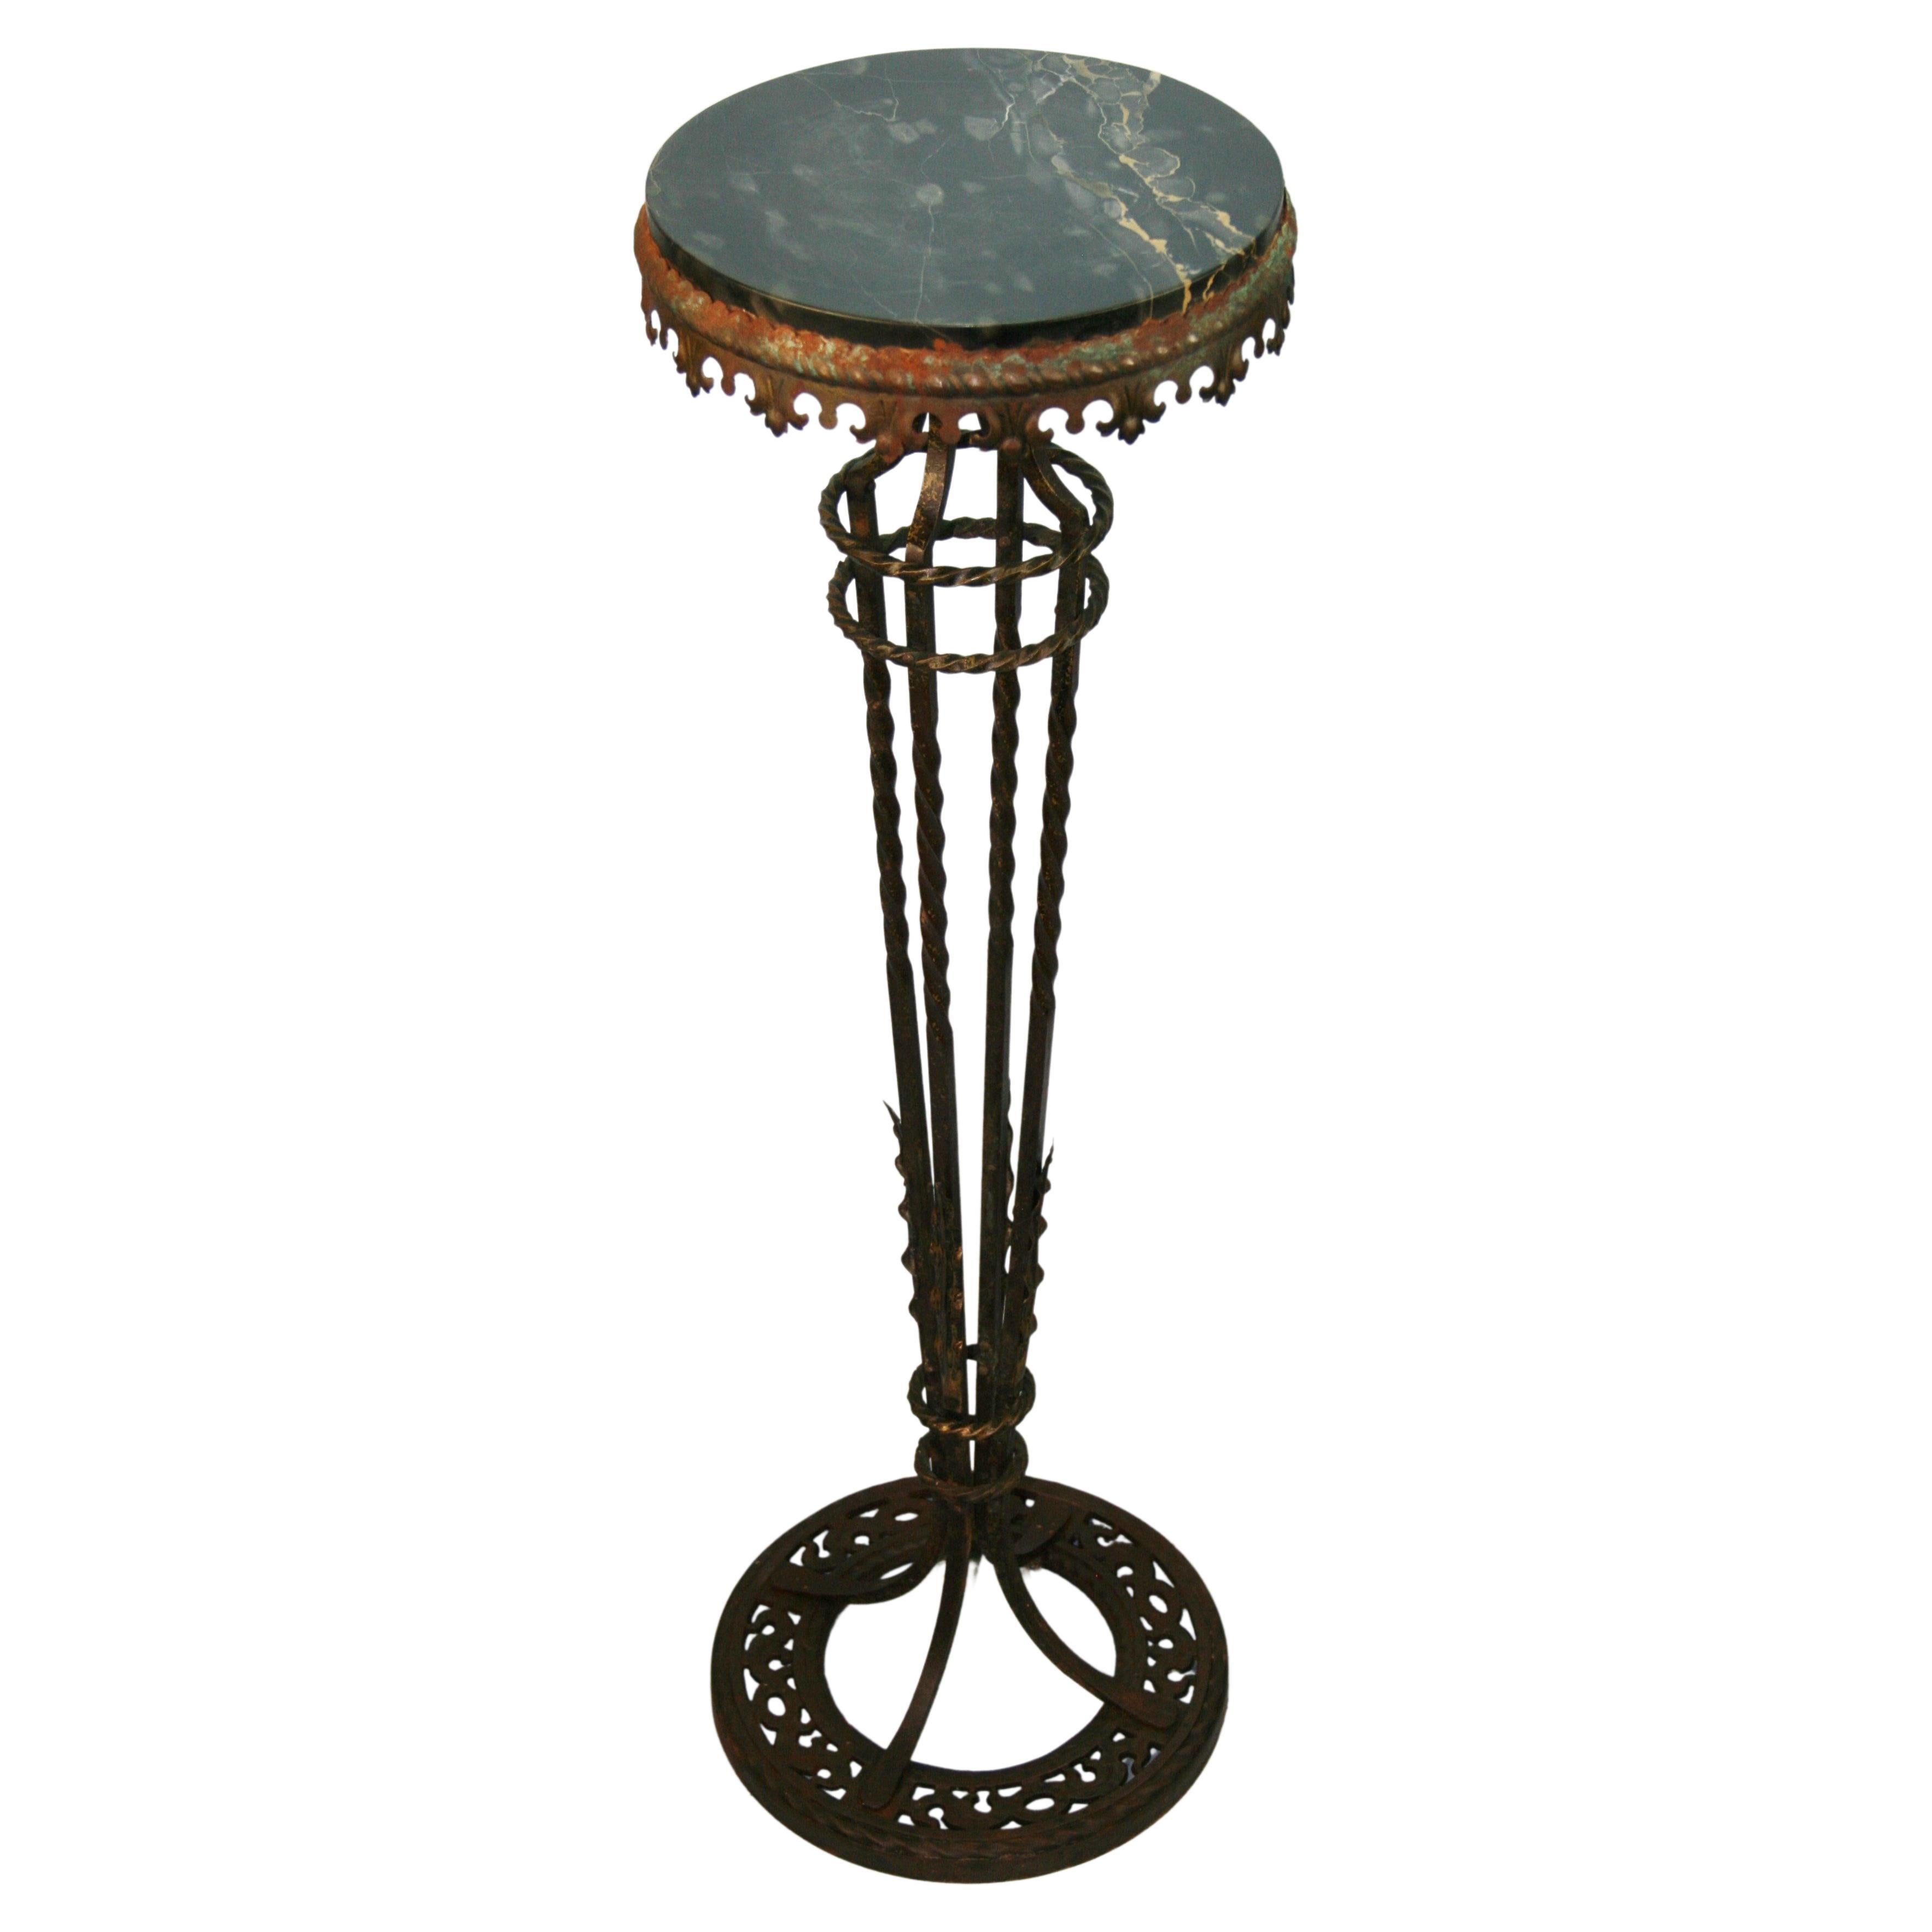 Victorian Tall Iron and Marble Garden Pedestal/Side Table